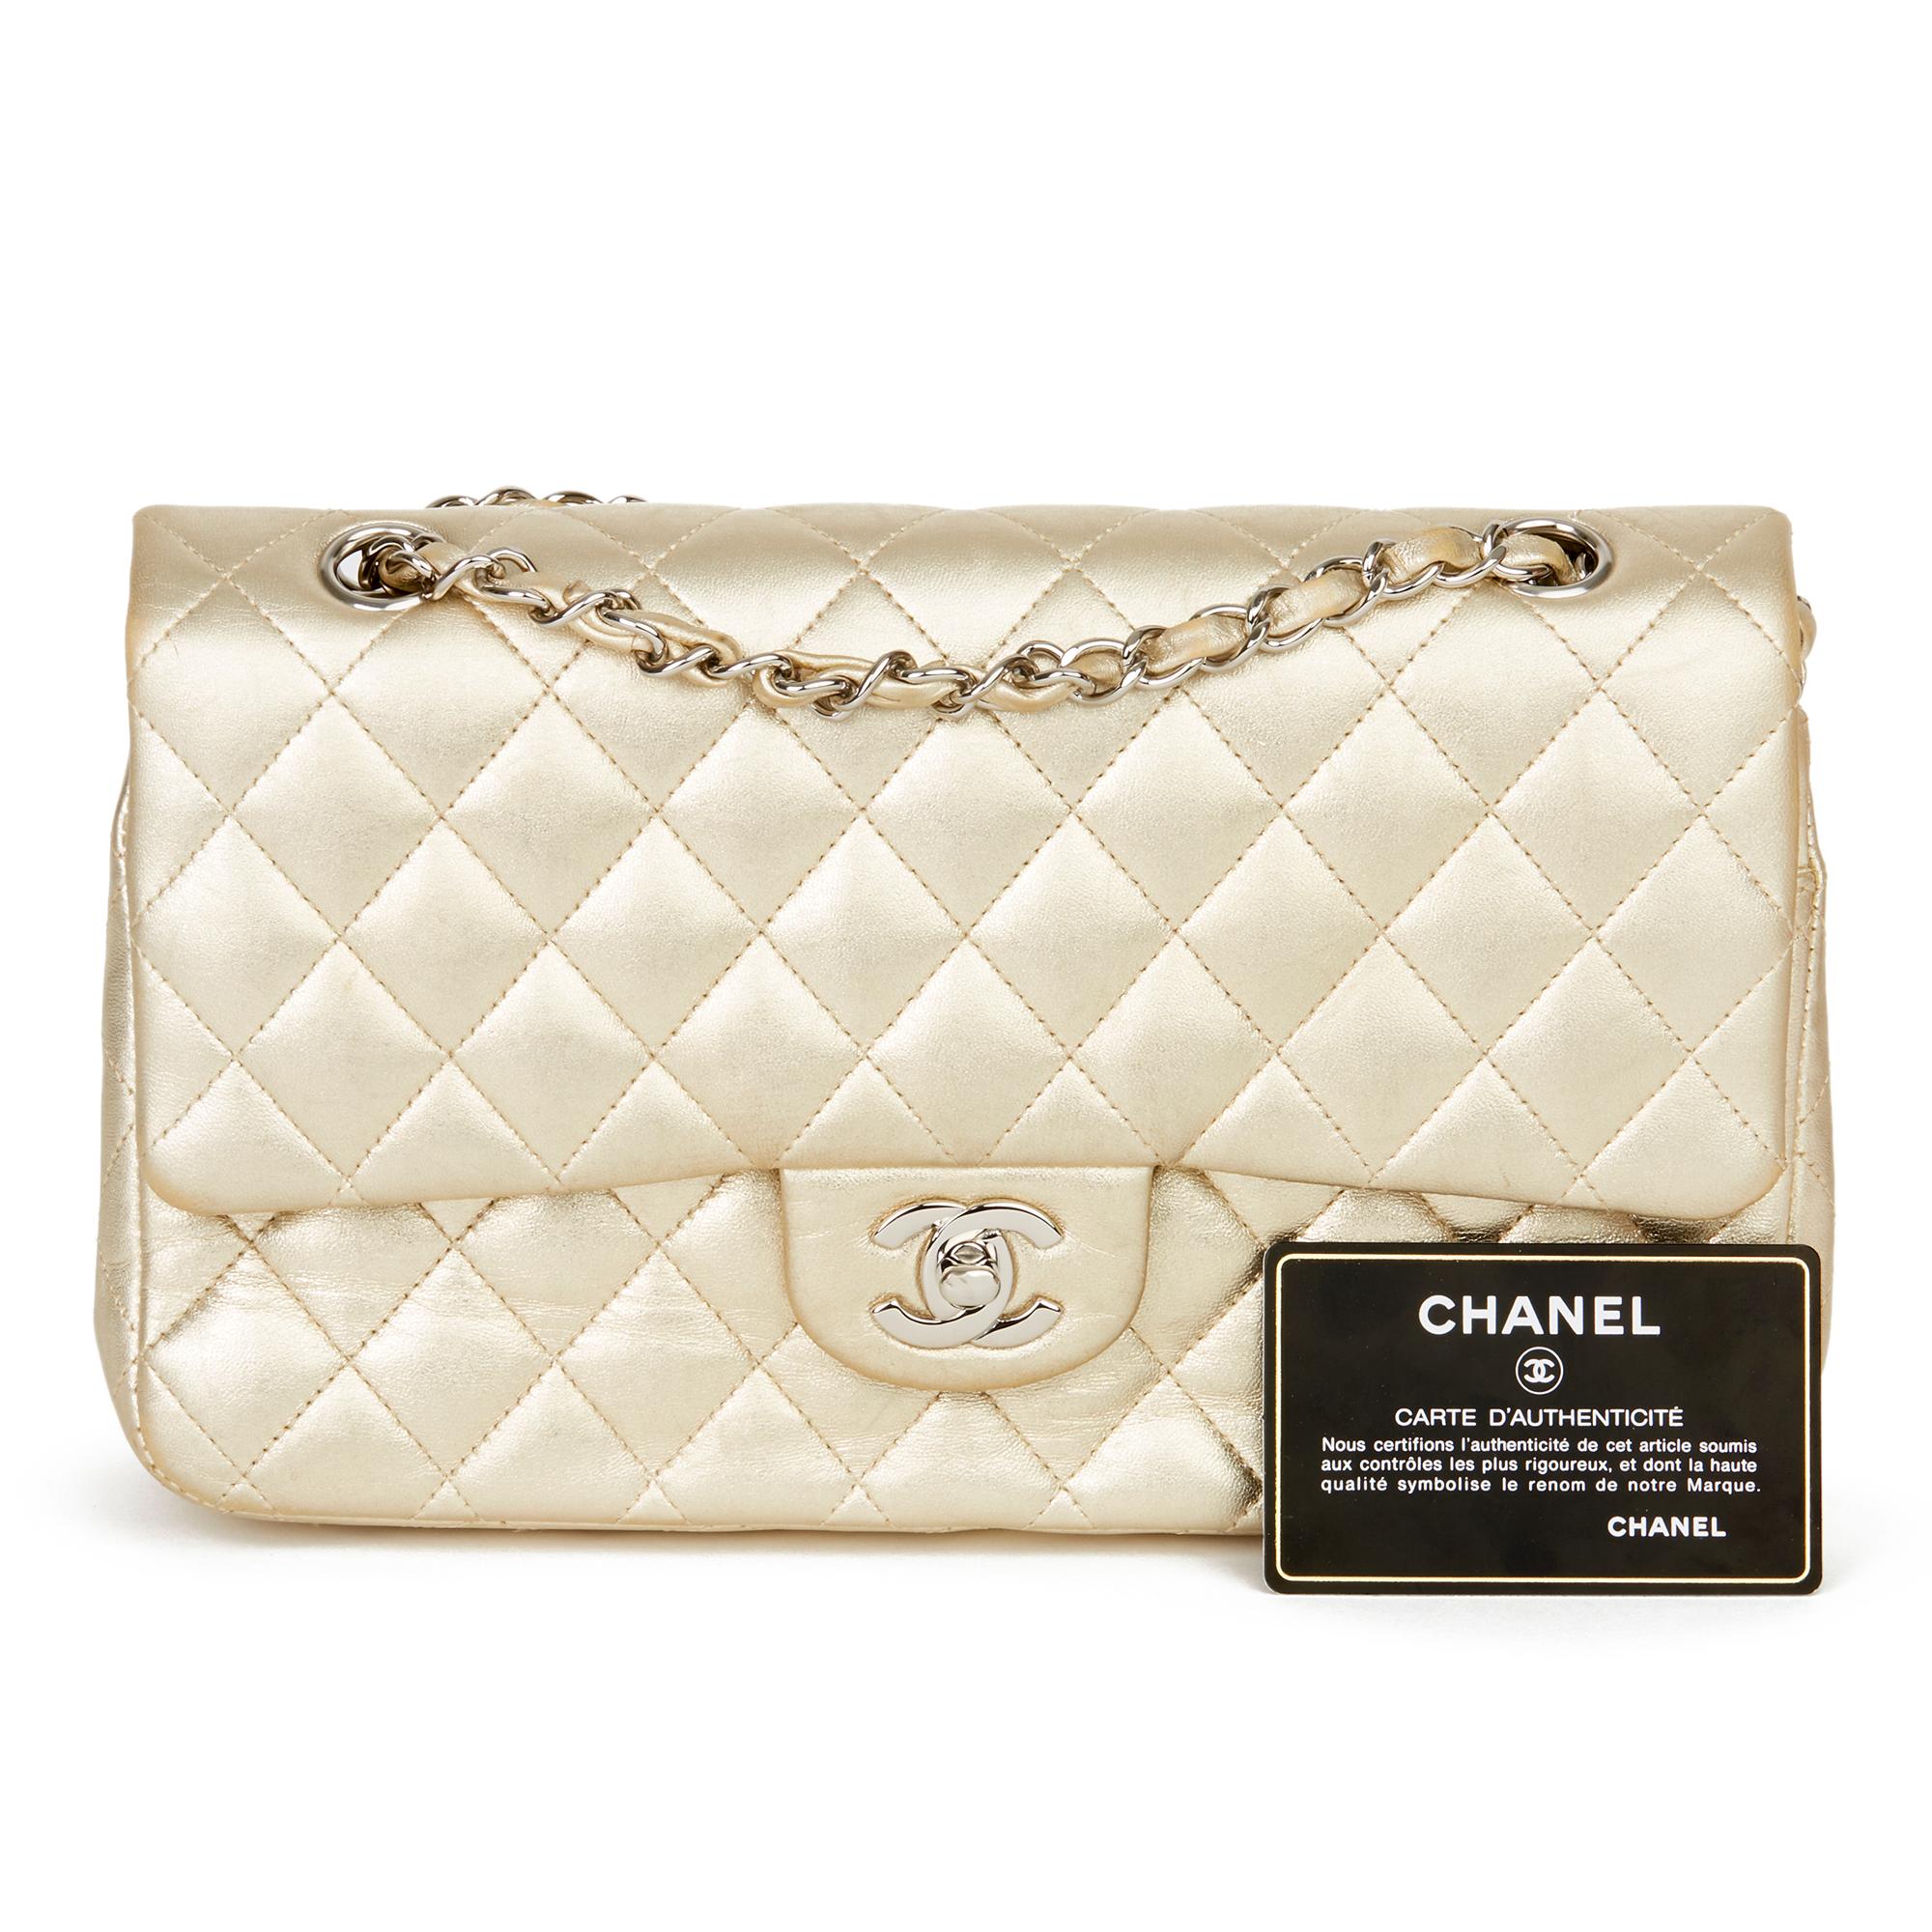 2007 Chanel Gold Quilted Metallic Lambskin Medium Classic Double Flap Bag 6